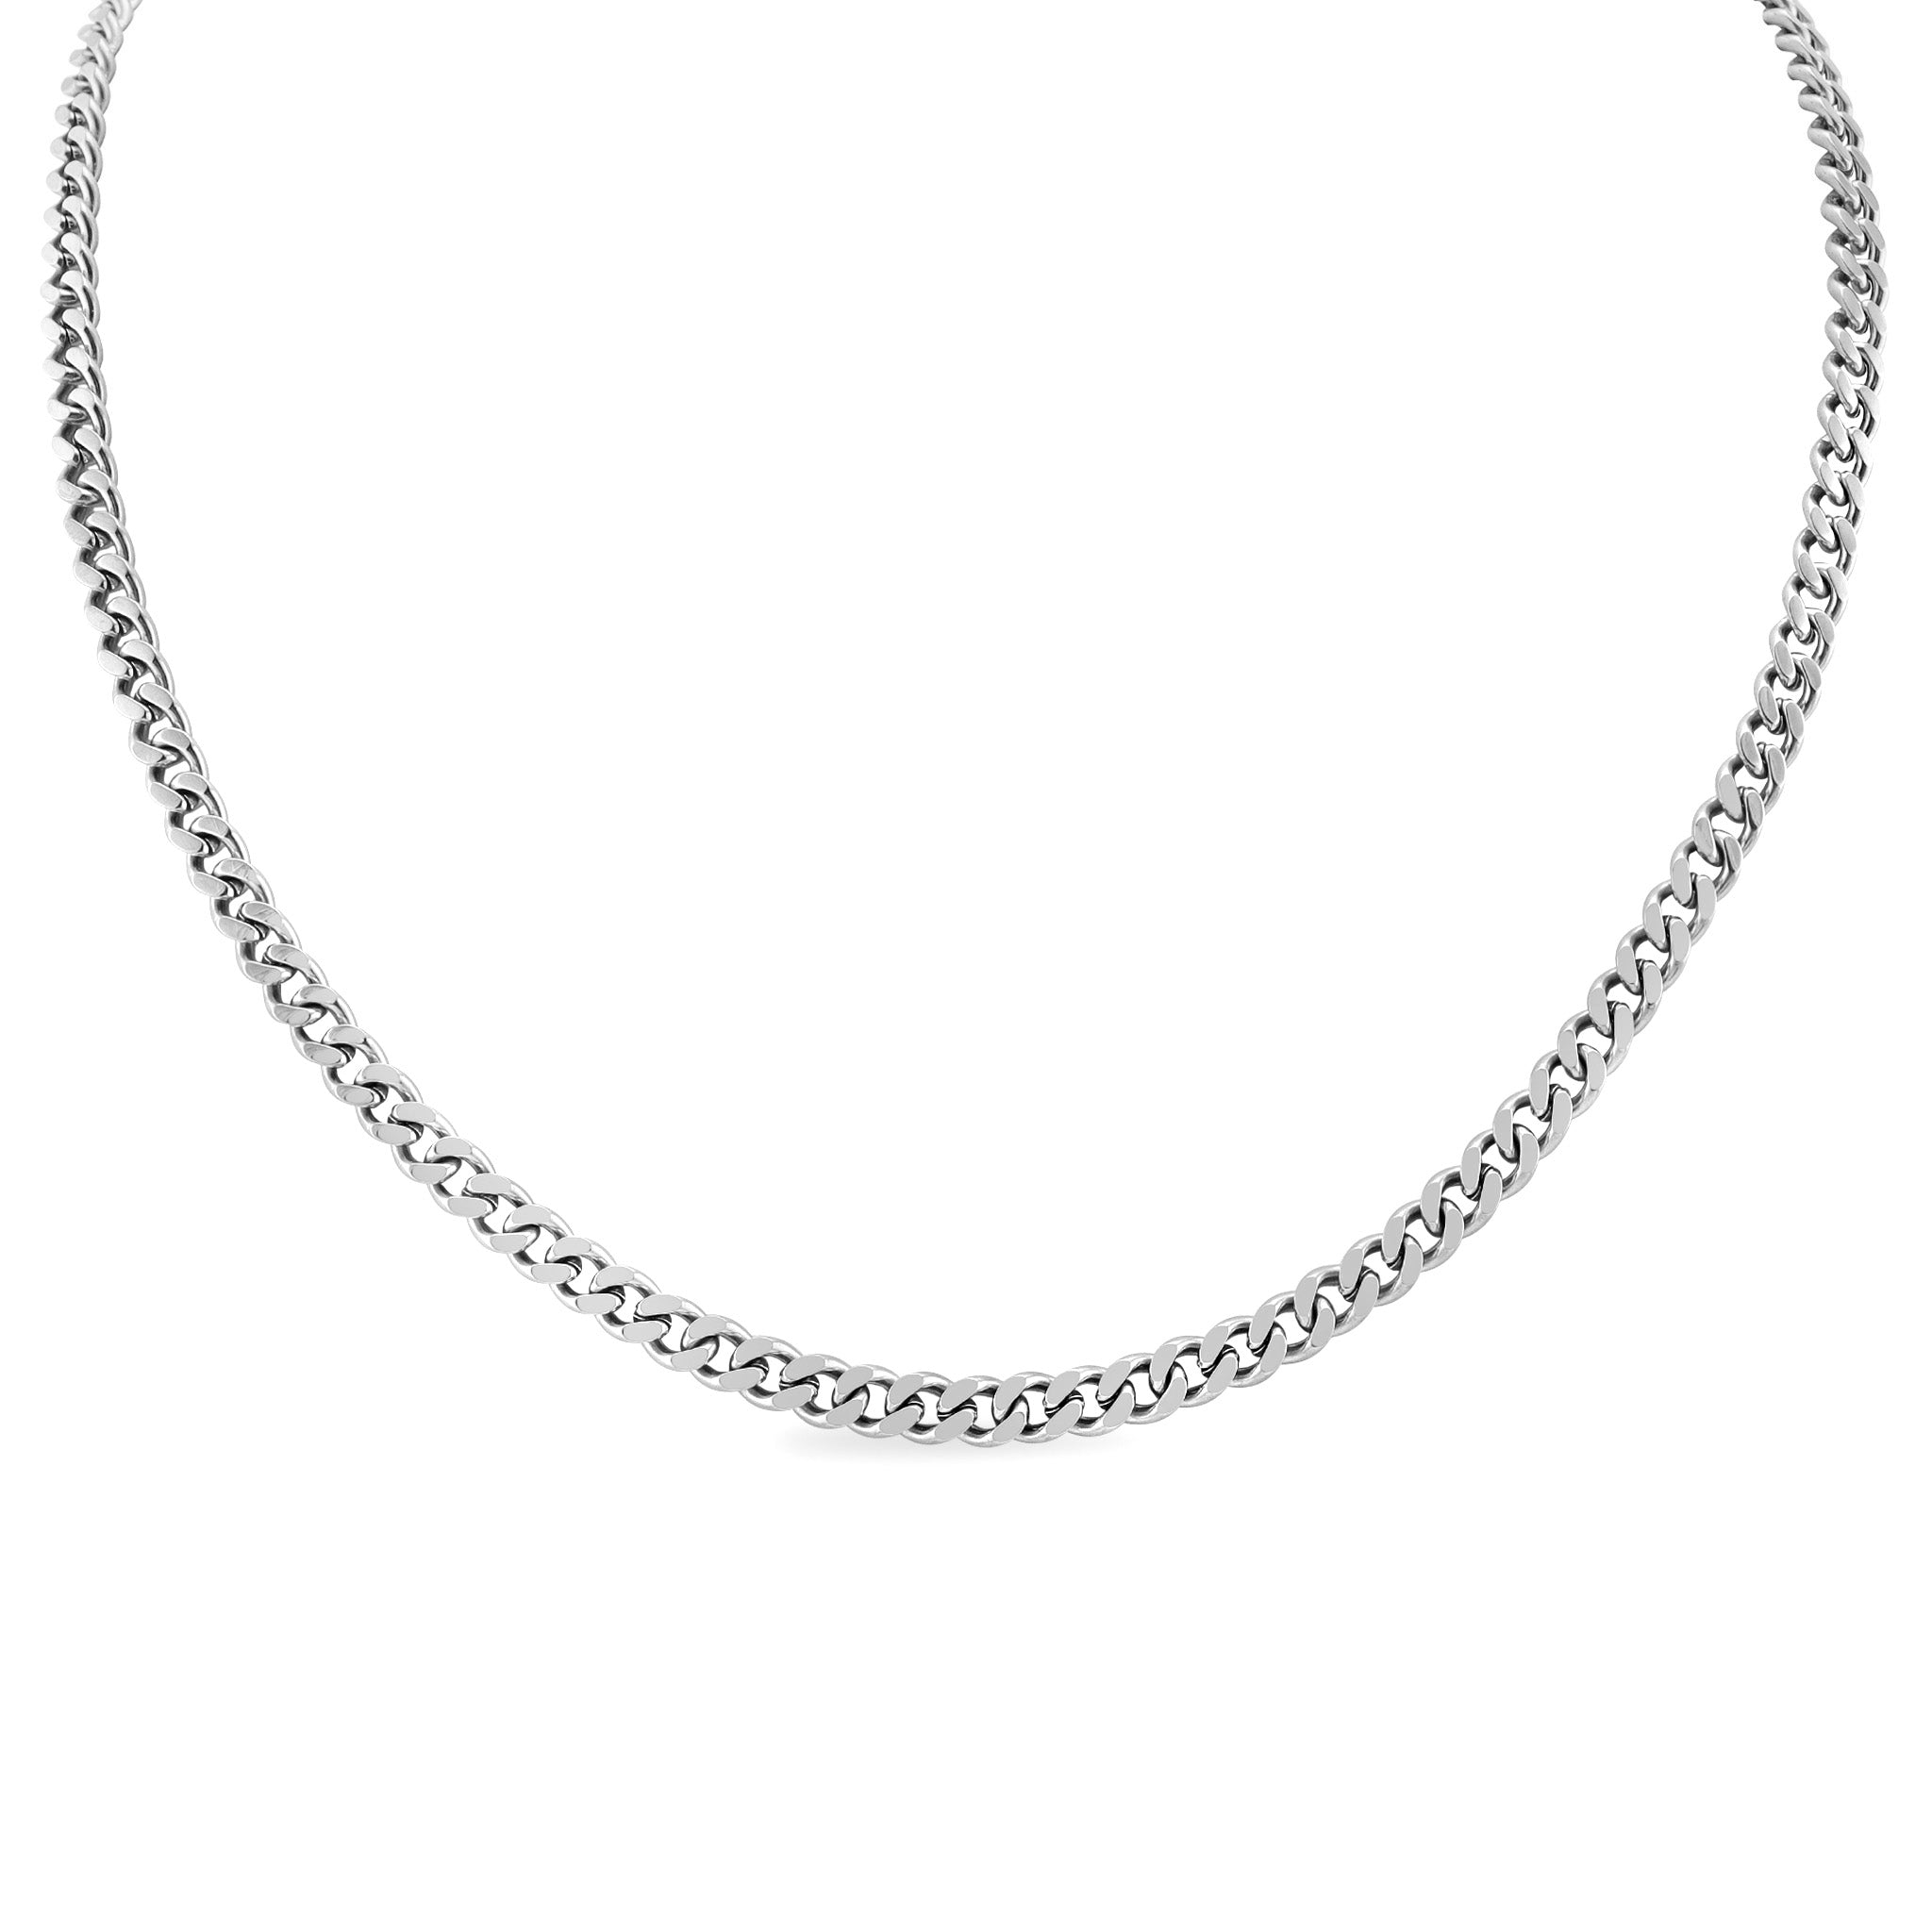 6 Stainless Steel Beaded Chain - Save 10% Instantly